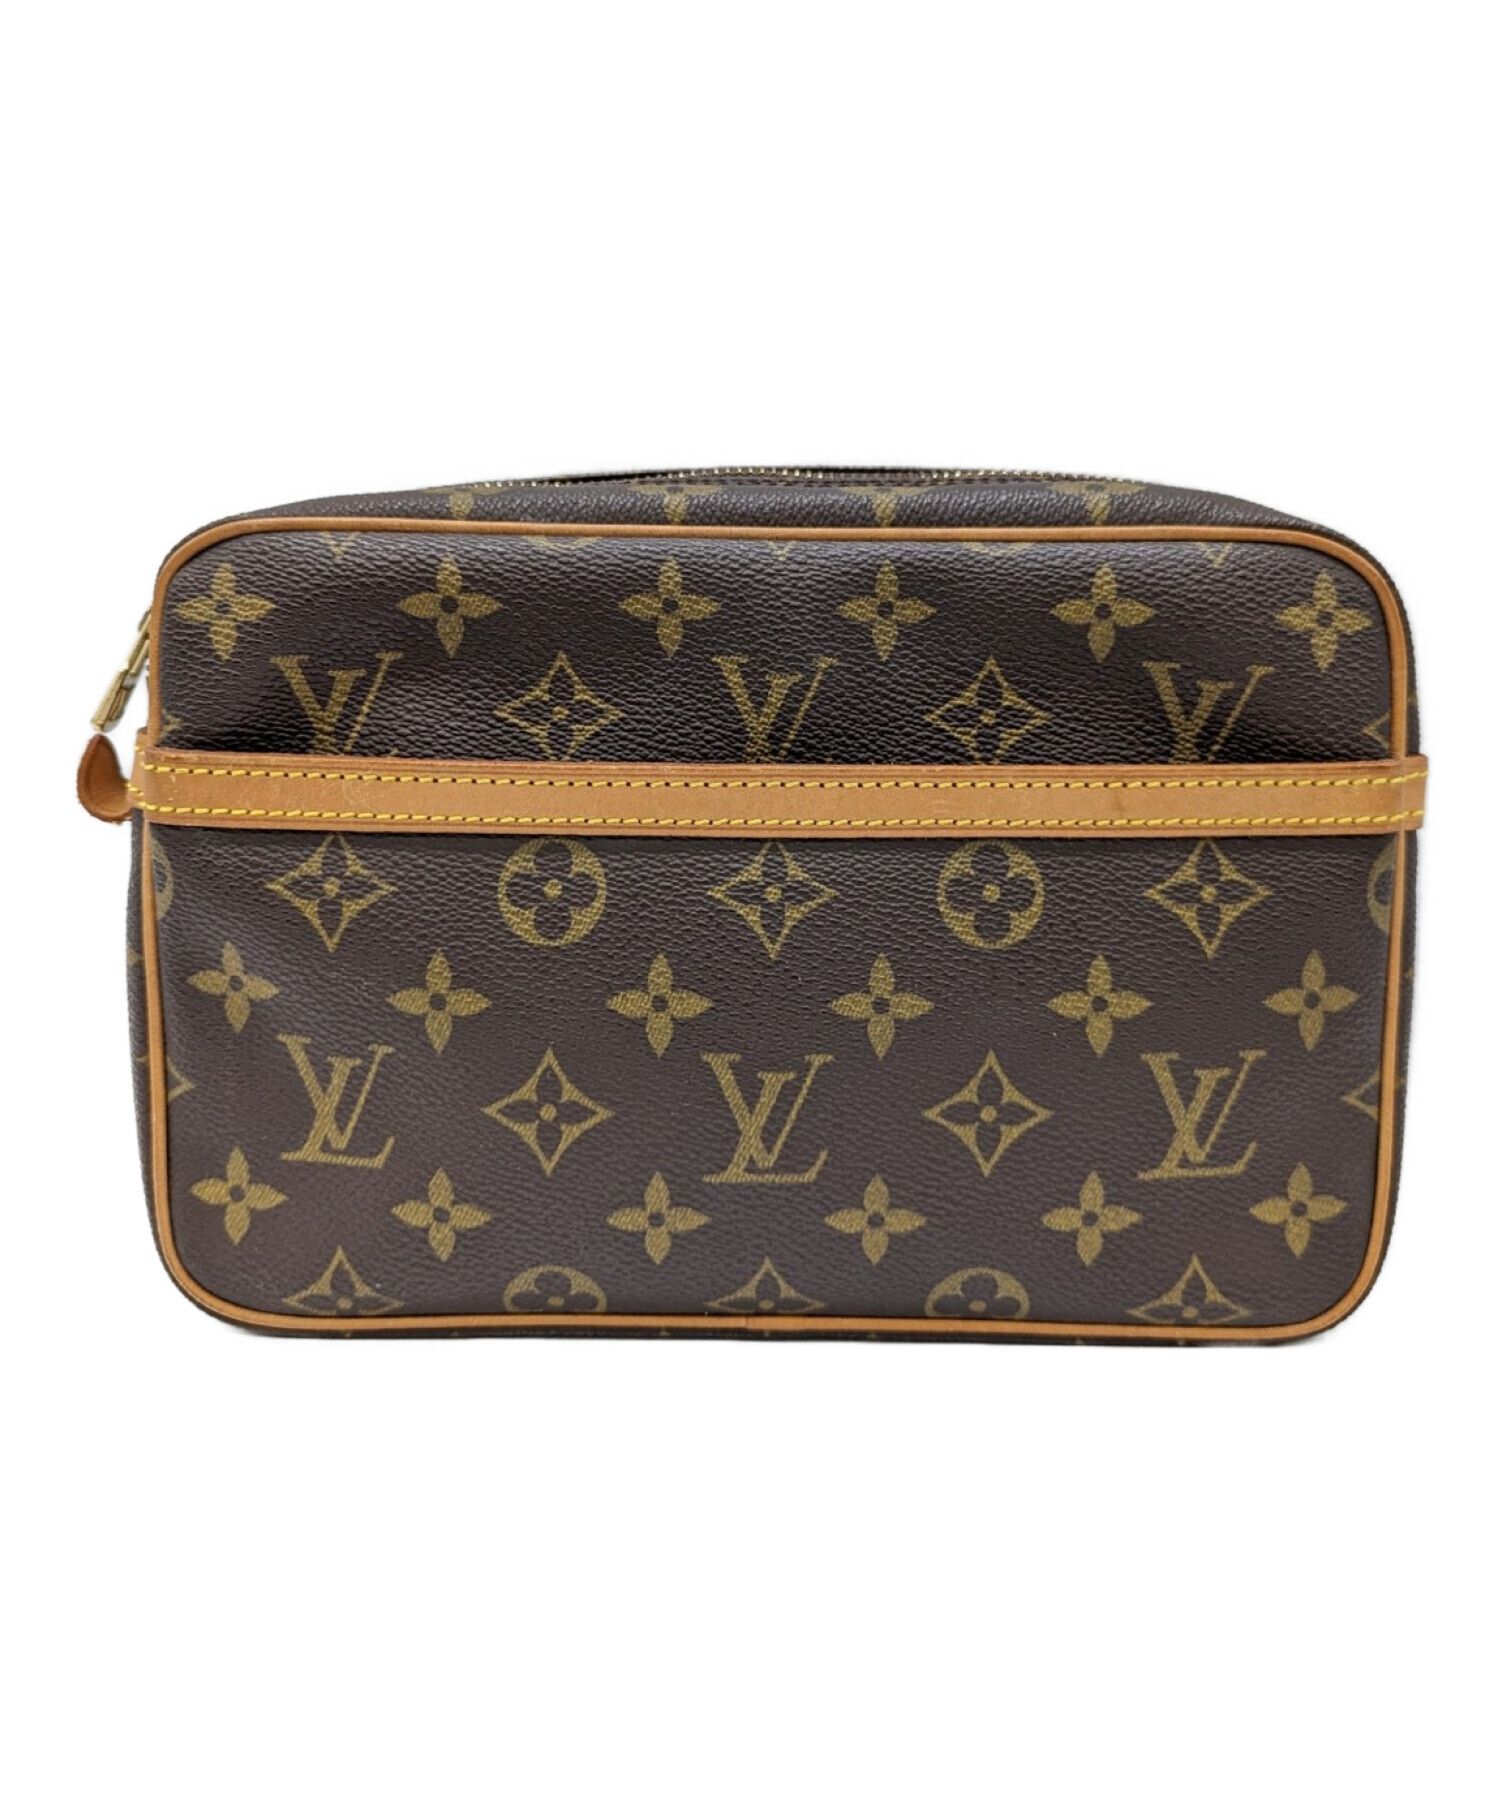 【LOUIS VUITTON】ルイヴィトン　コンピエーニュ　23